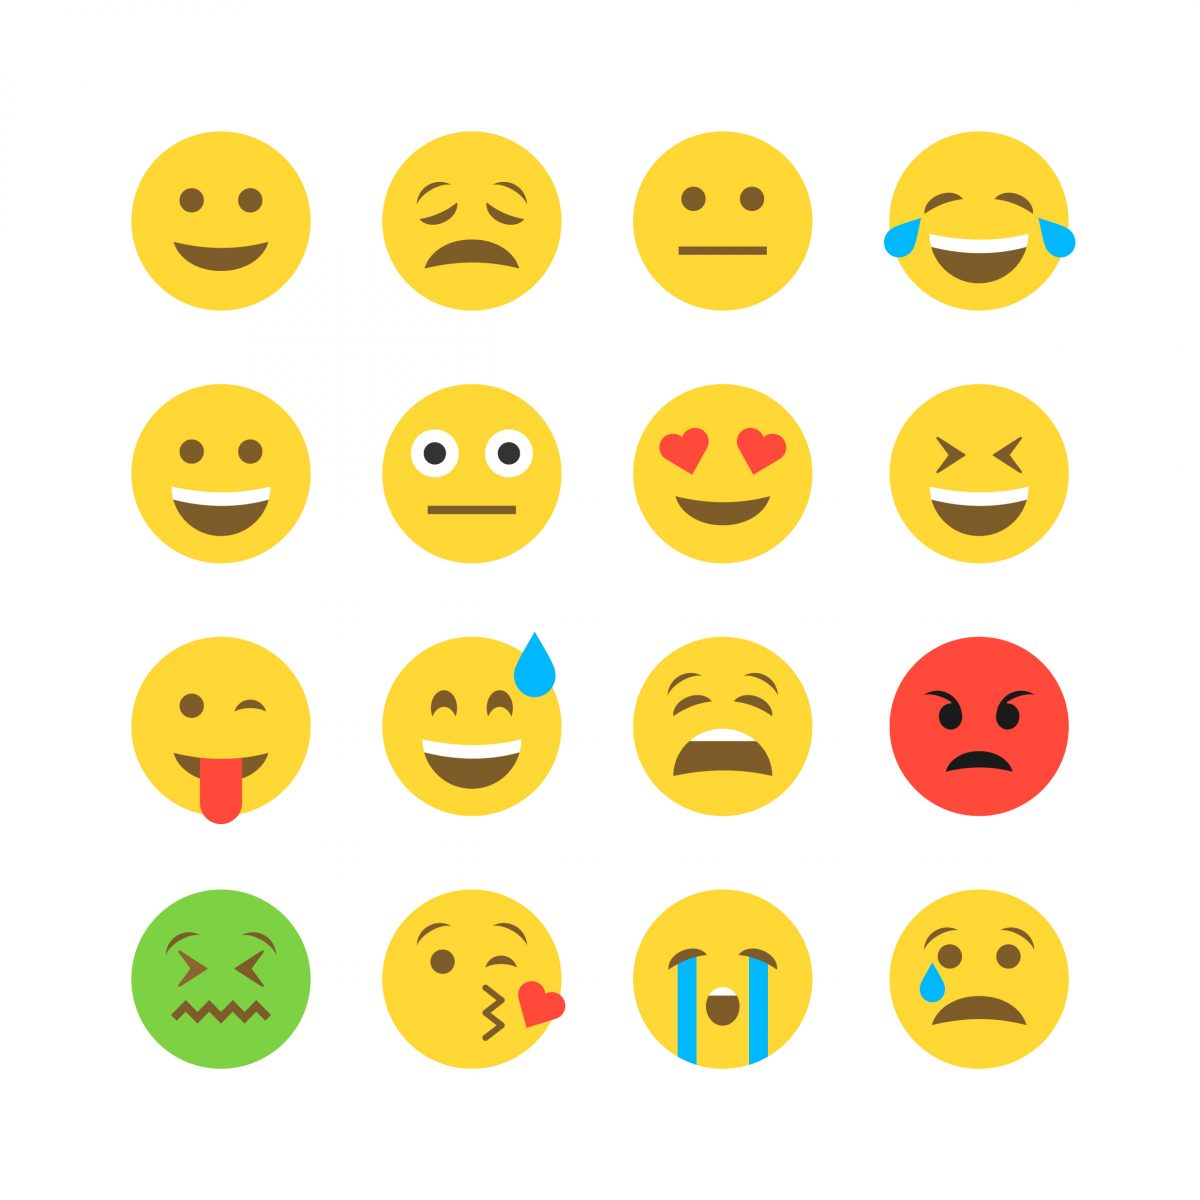 5-ways-to-properly-use-emoticons-at-work